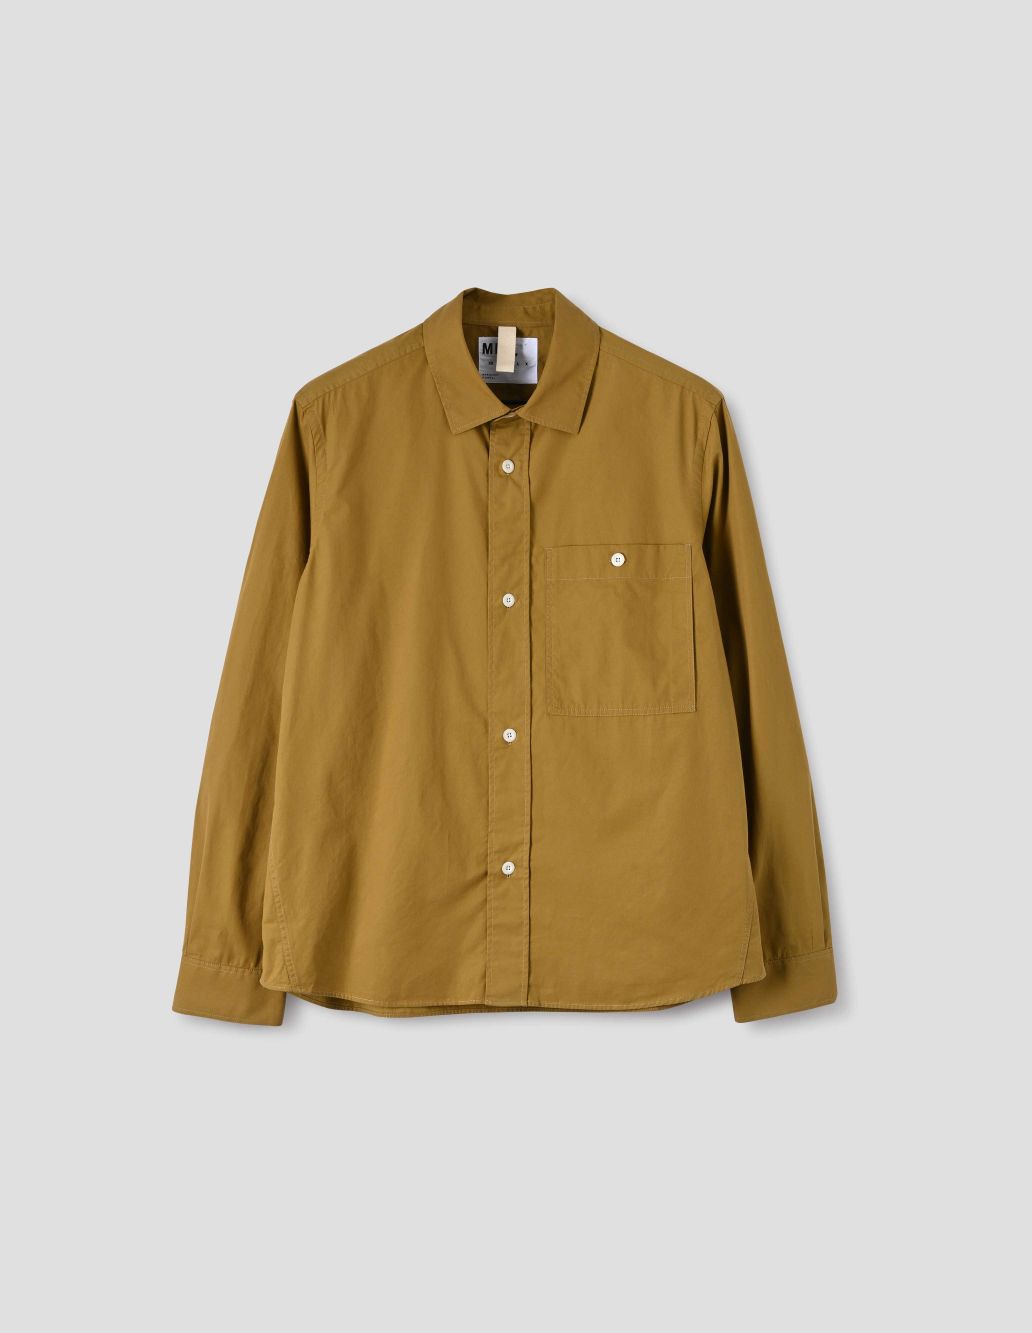 MARGARET HOWELL - Ochre washed cotton overall shirt | MHL. by 